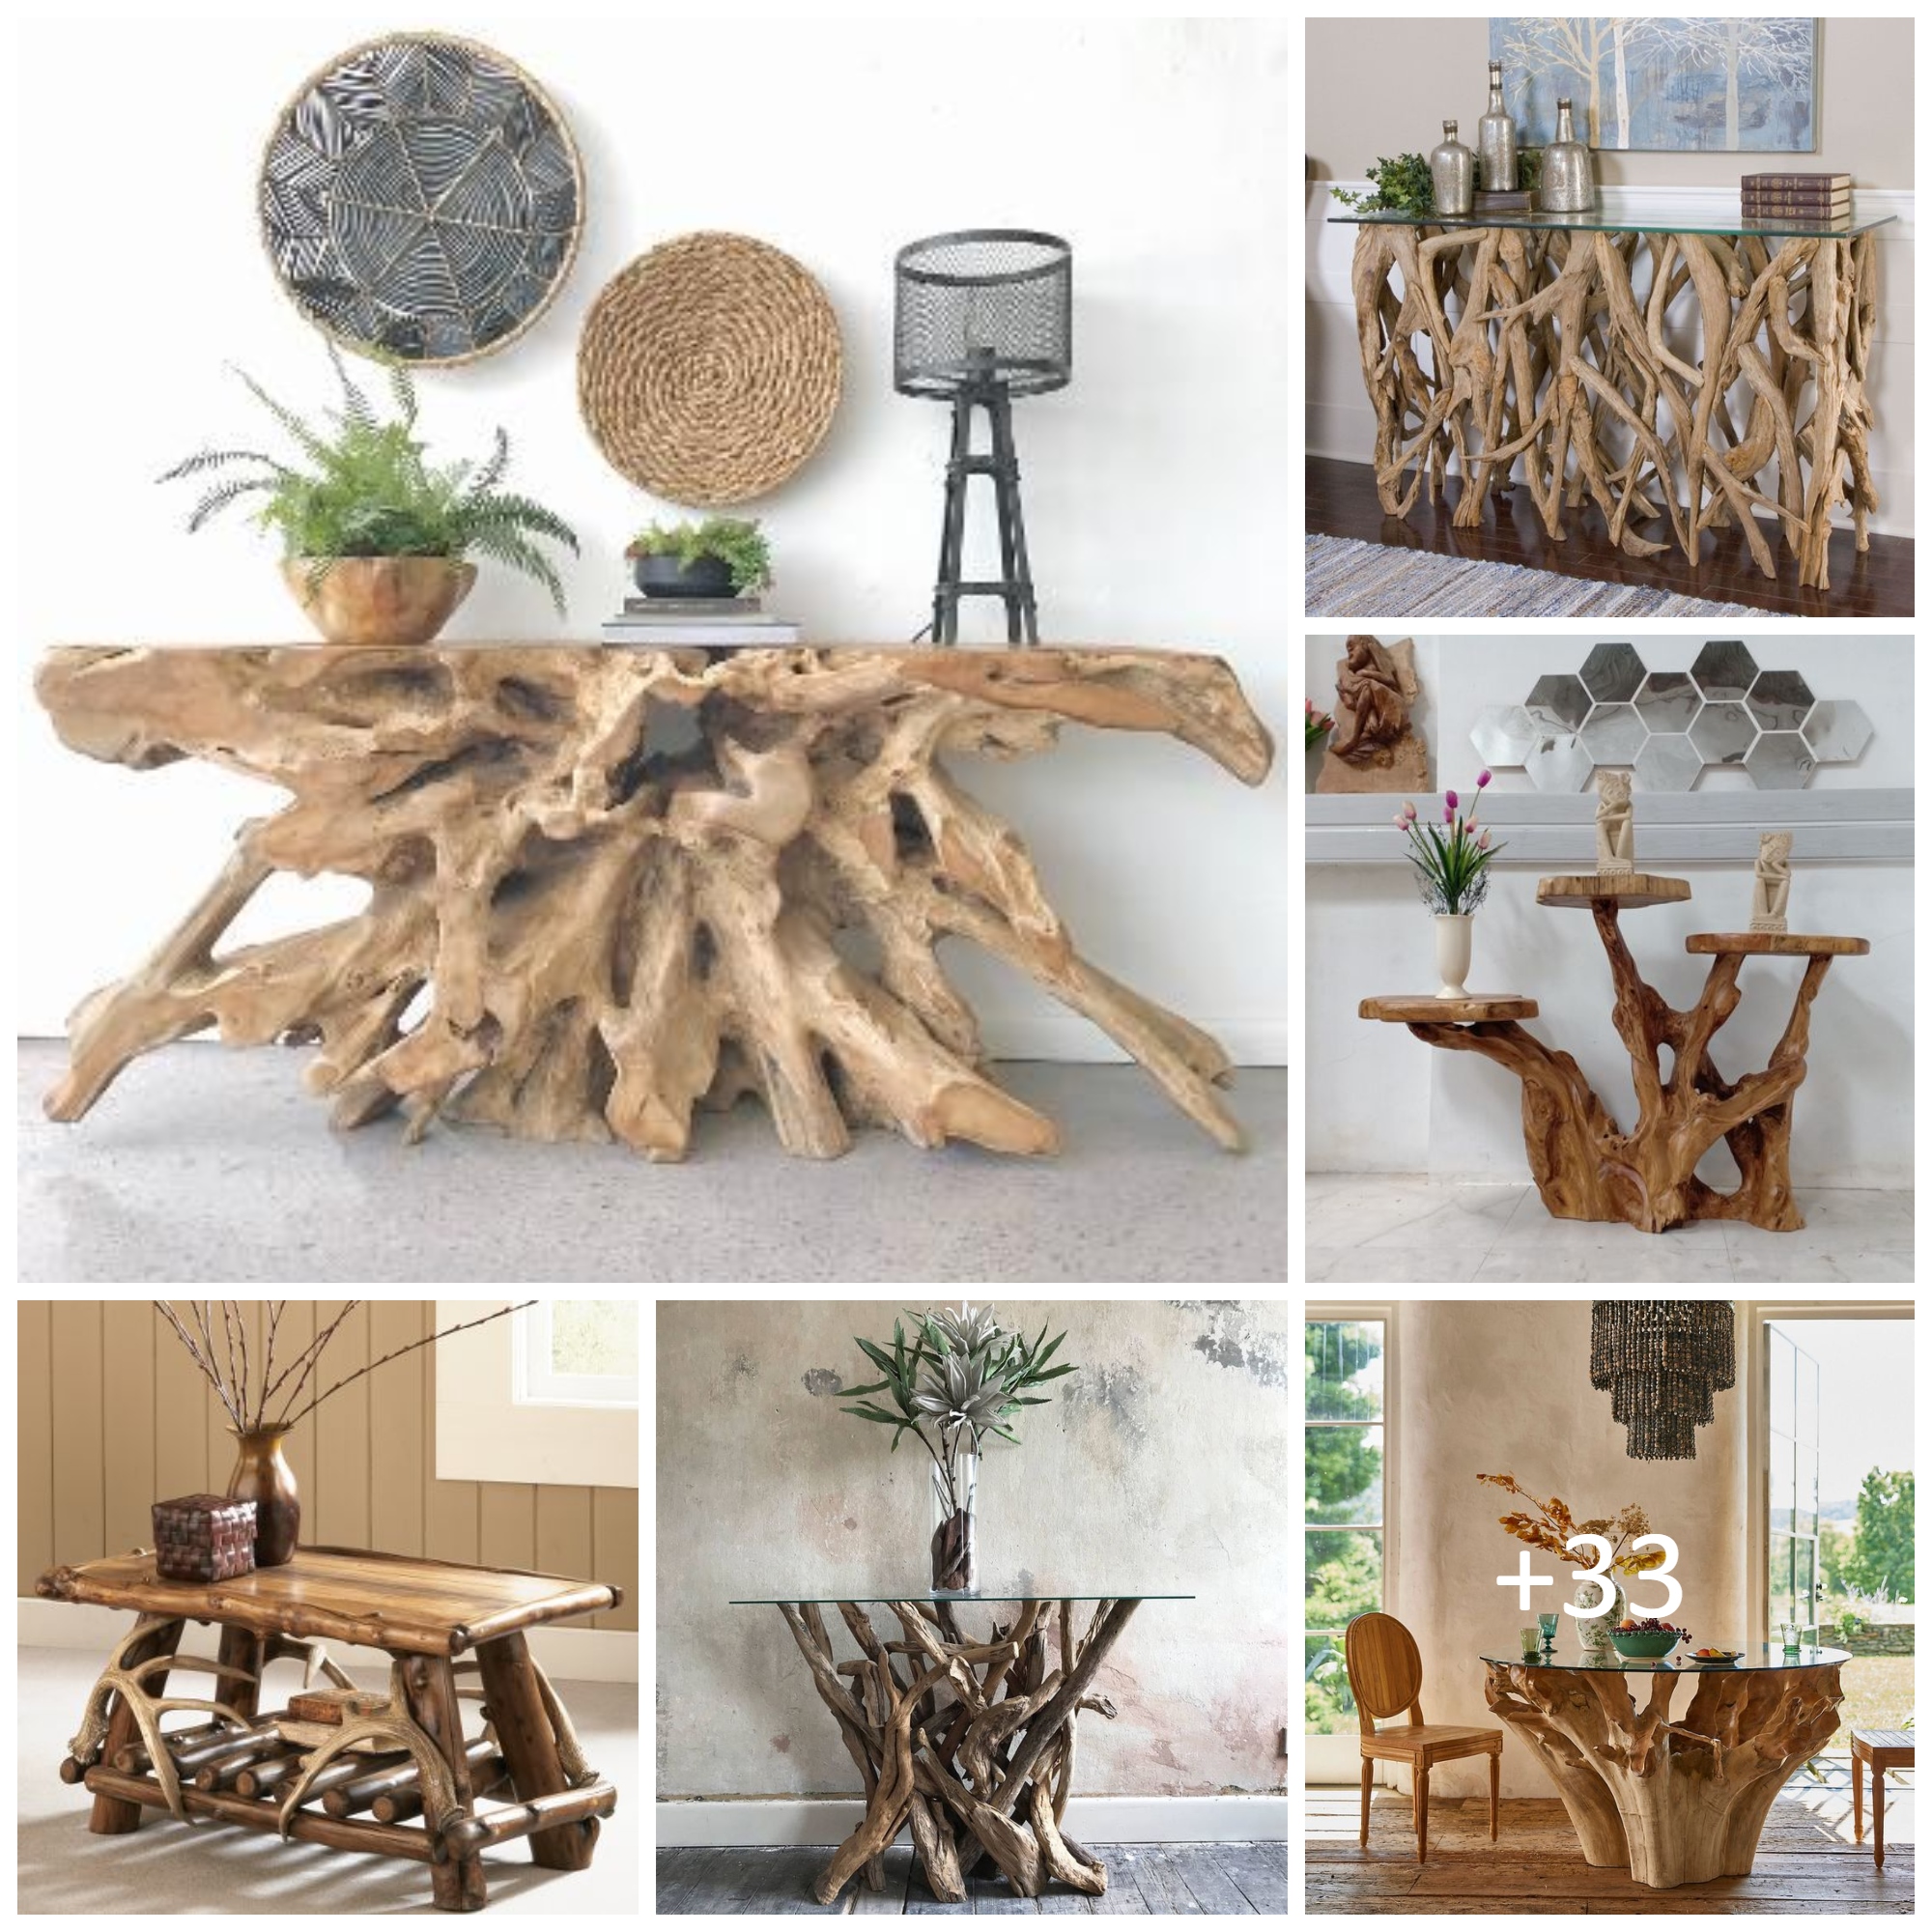 Rustic furniture ideas to transform your home